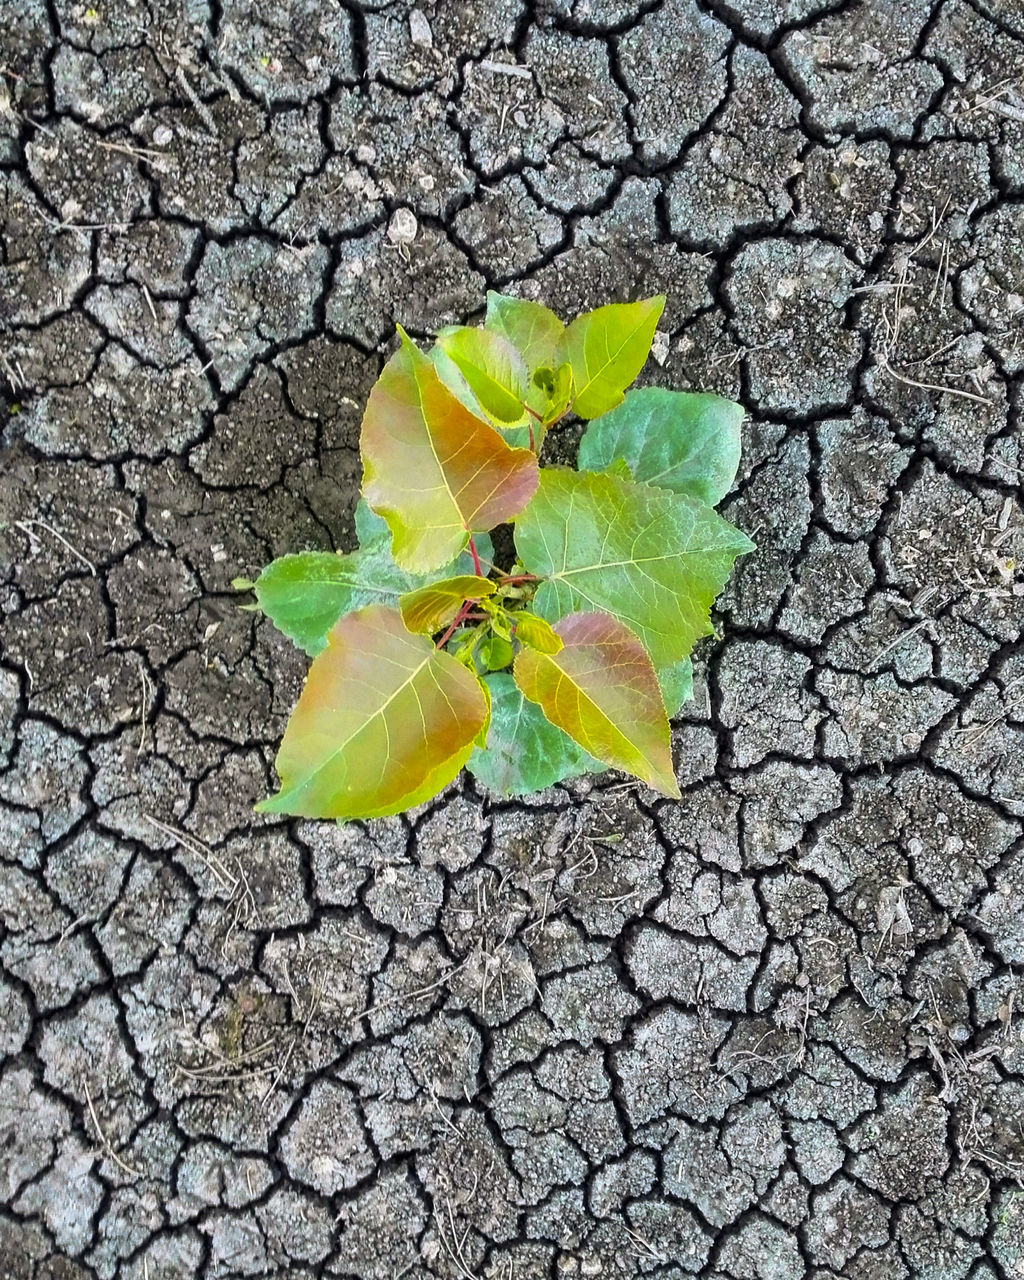 soil, leaf, plant part, nature, dry, cracked, no people, day, high angle view, yellow, plant, textured, outdoors, close-up, beauty in nature, pattern, fragility, directly above, leaf vein, branch, flower, green, tree, autumn, growth, drought, field, road, street, land, road surface